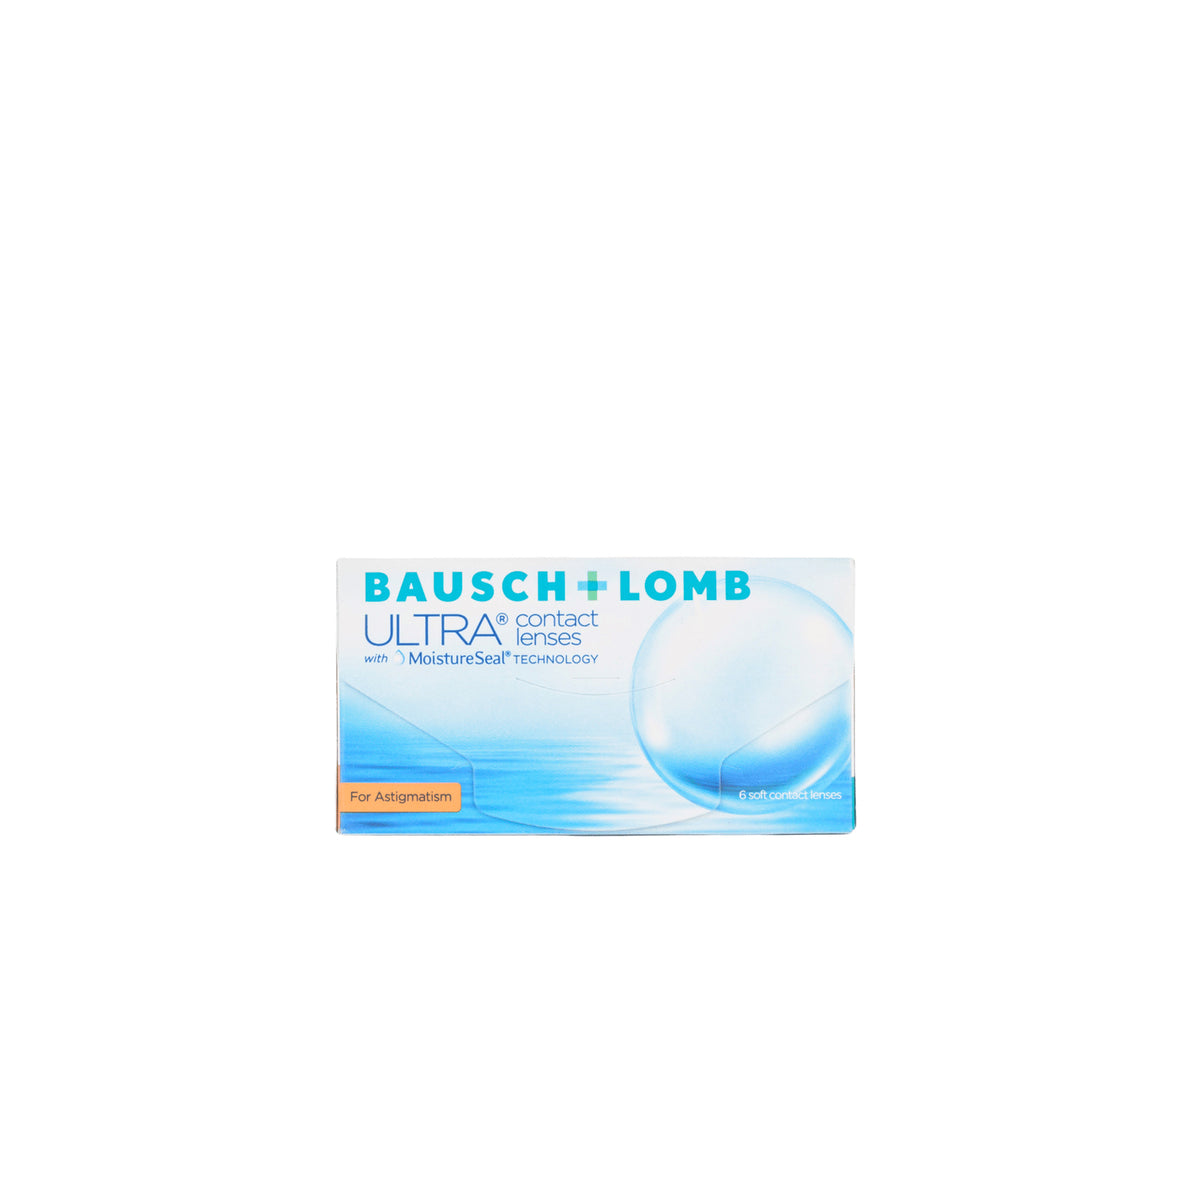 Ultra for Astigmatism 6 Contact Lenses Bausch & Lomb   